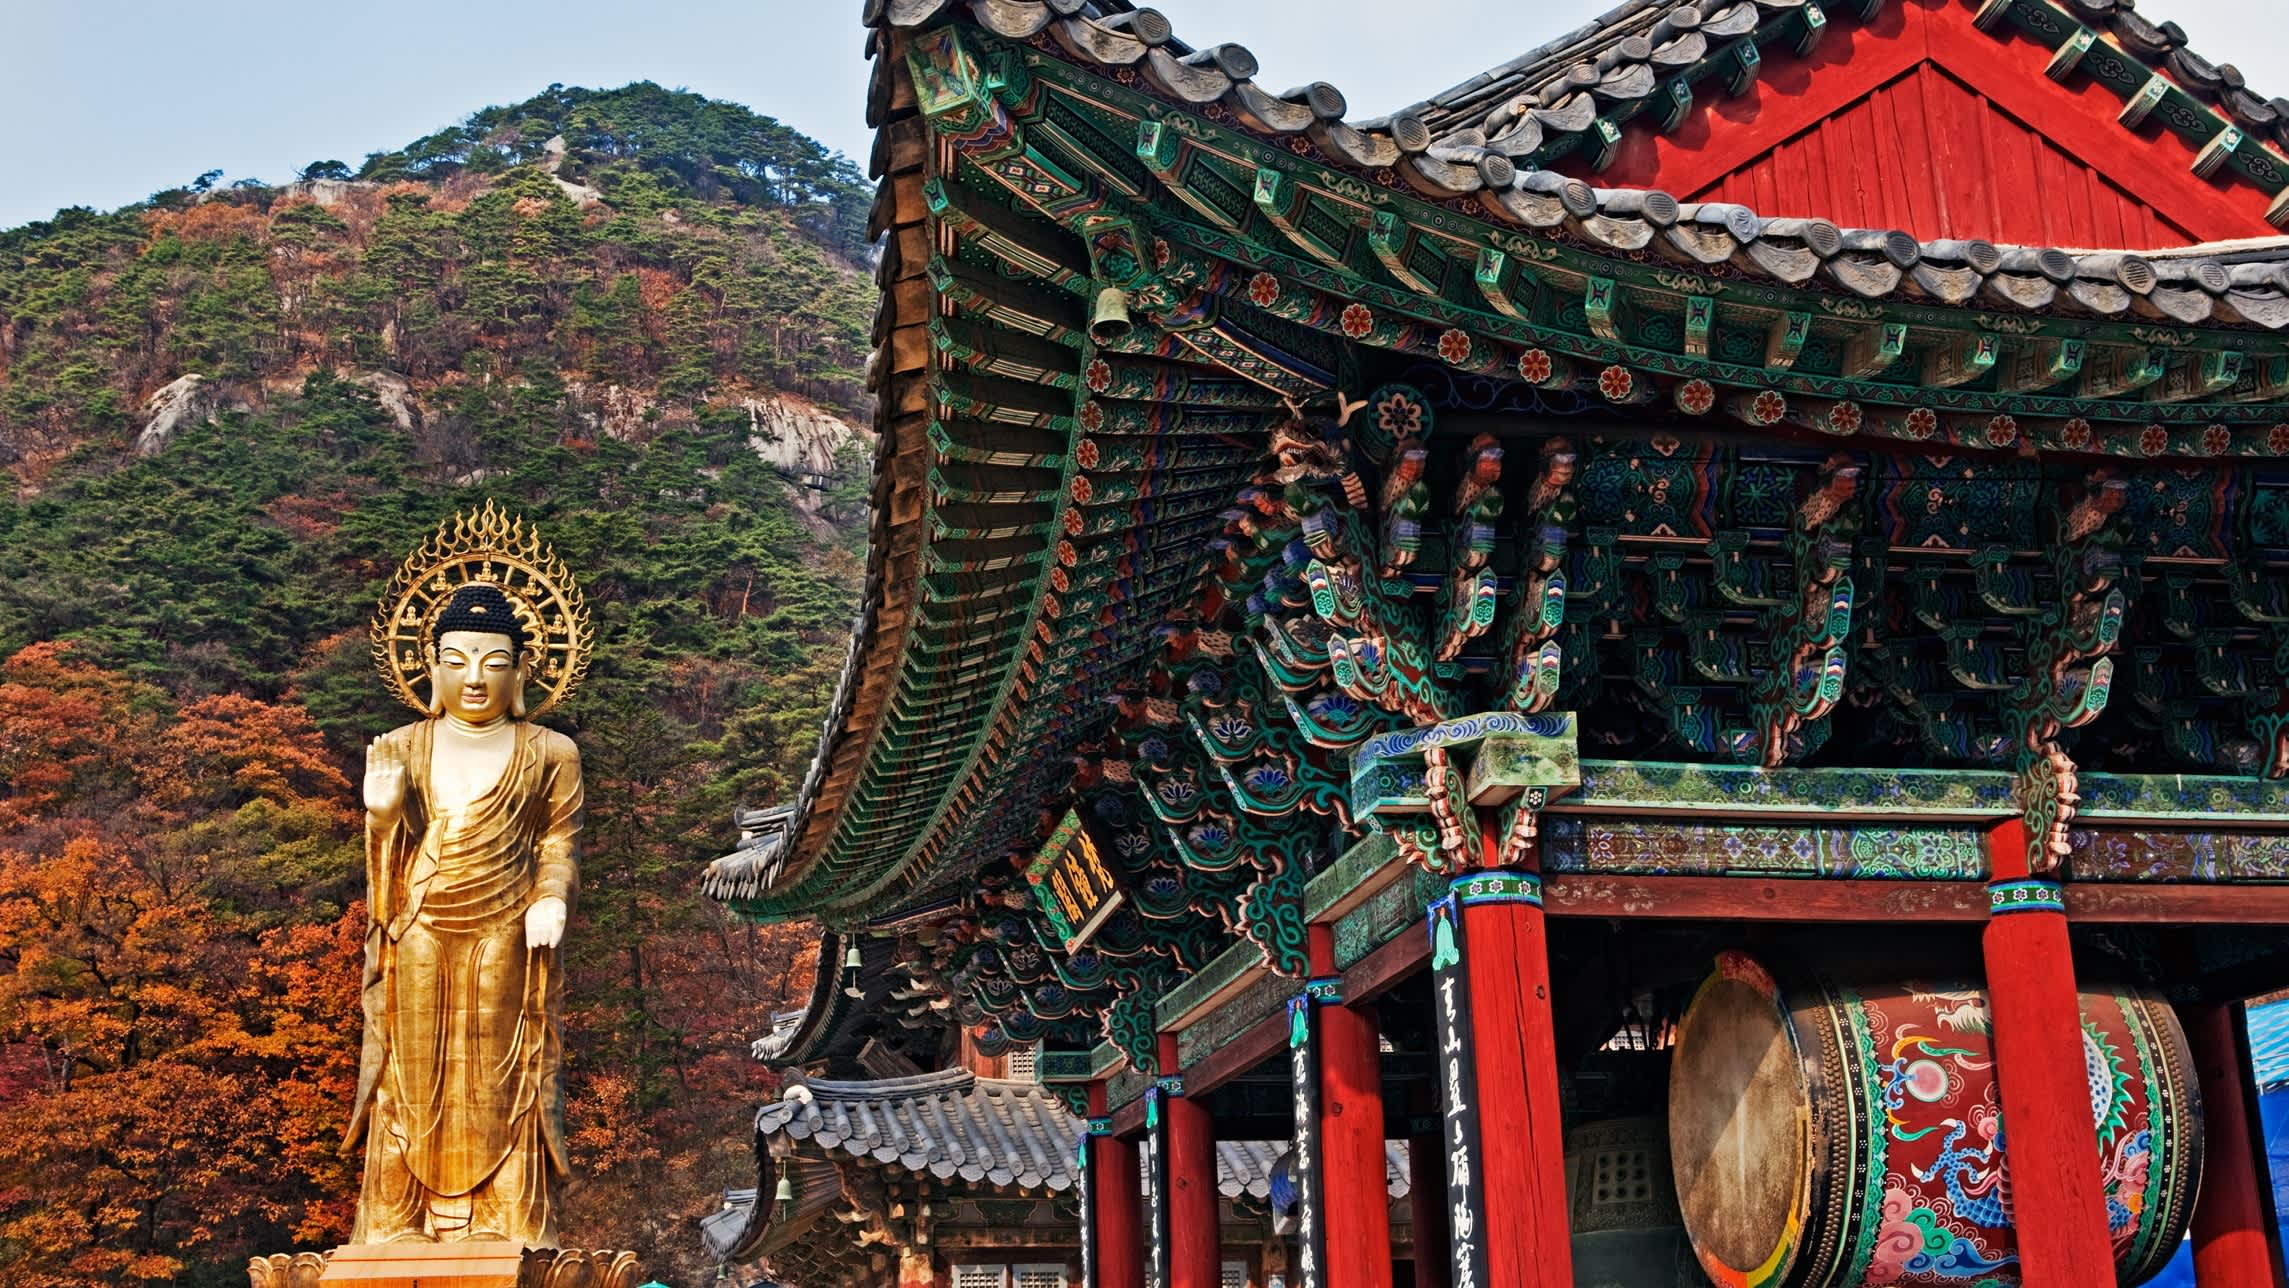 A traditionally decorated Buddhist temple with an ornate mokoshi roof carvings and a golden Buddha statue